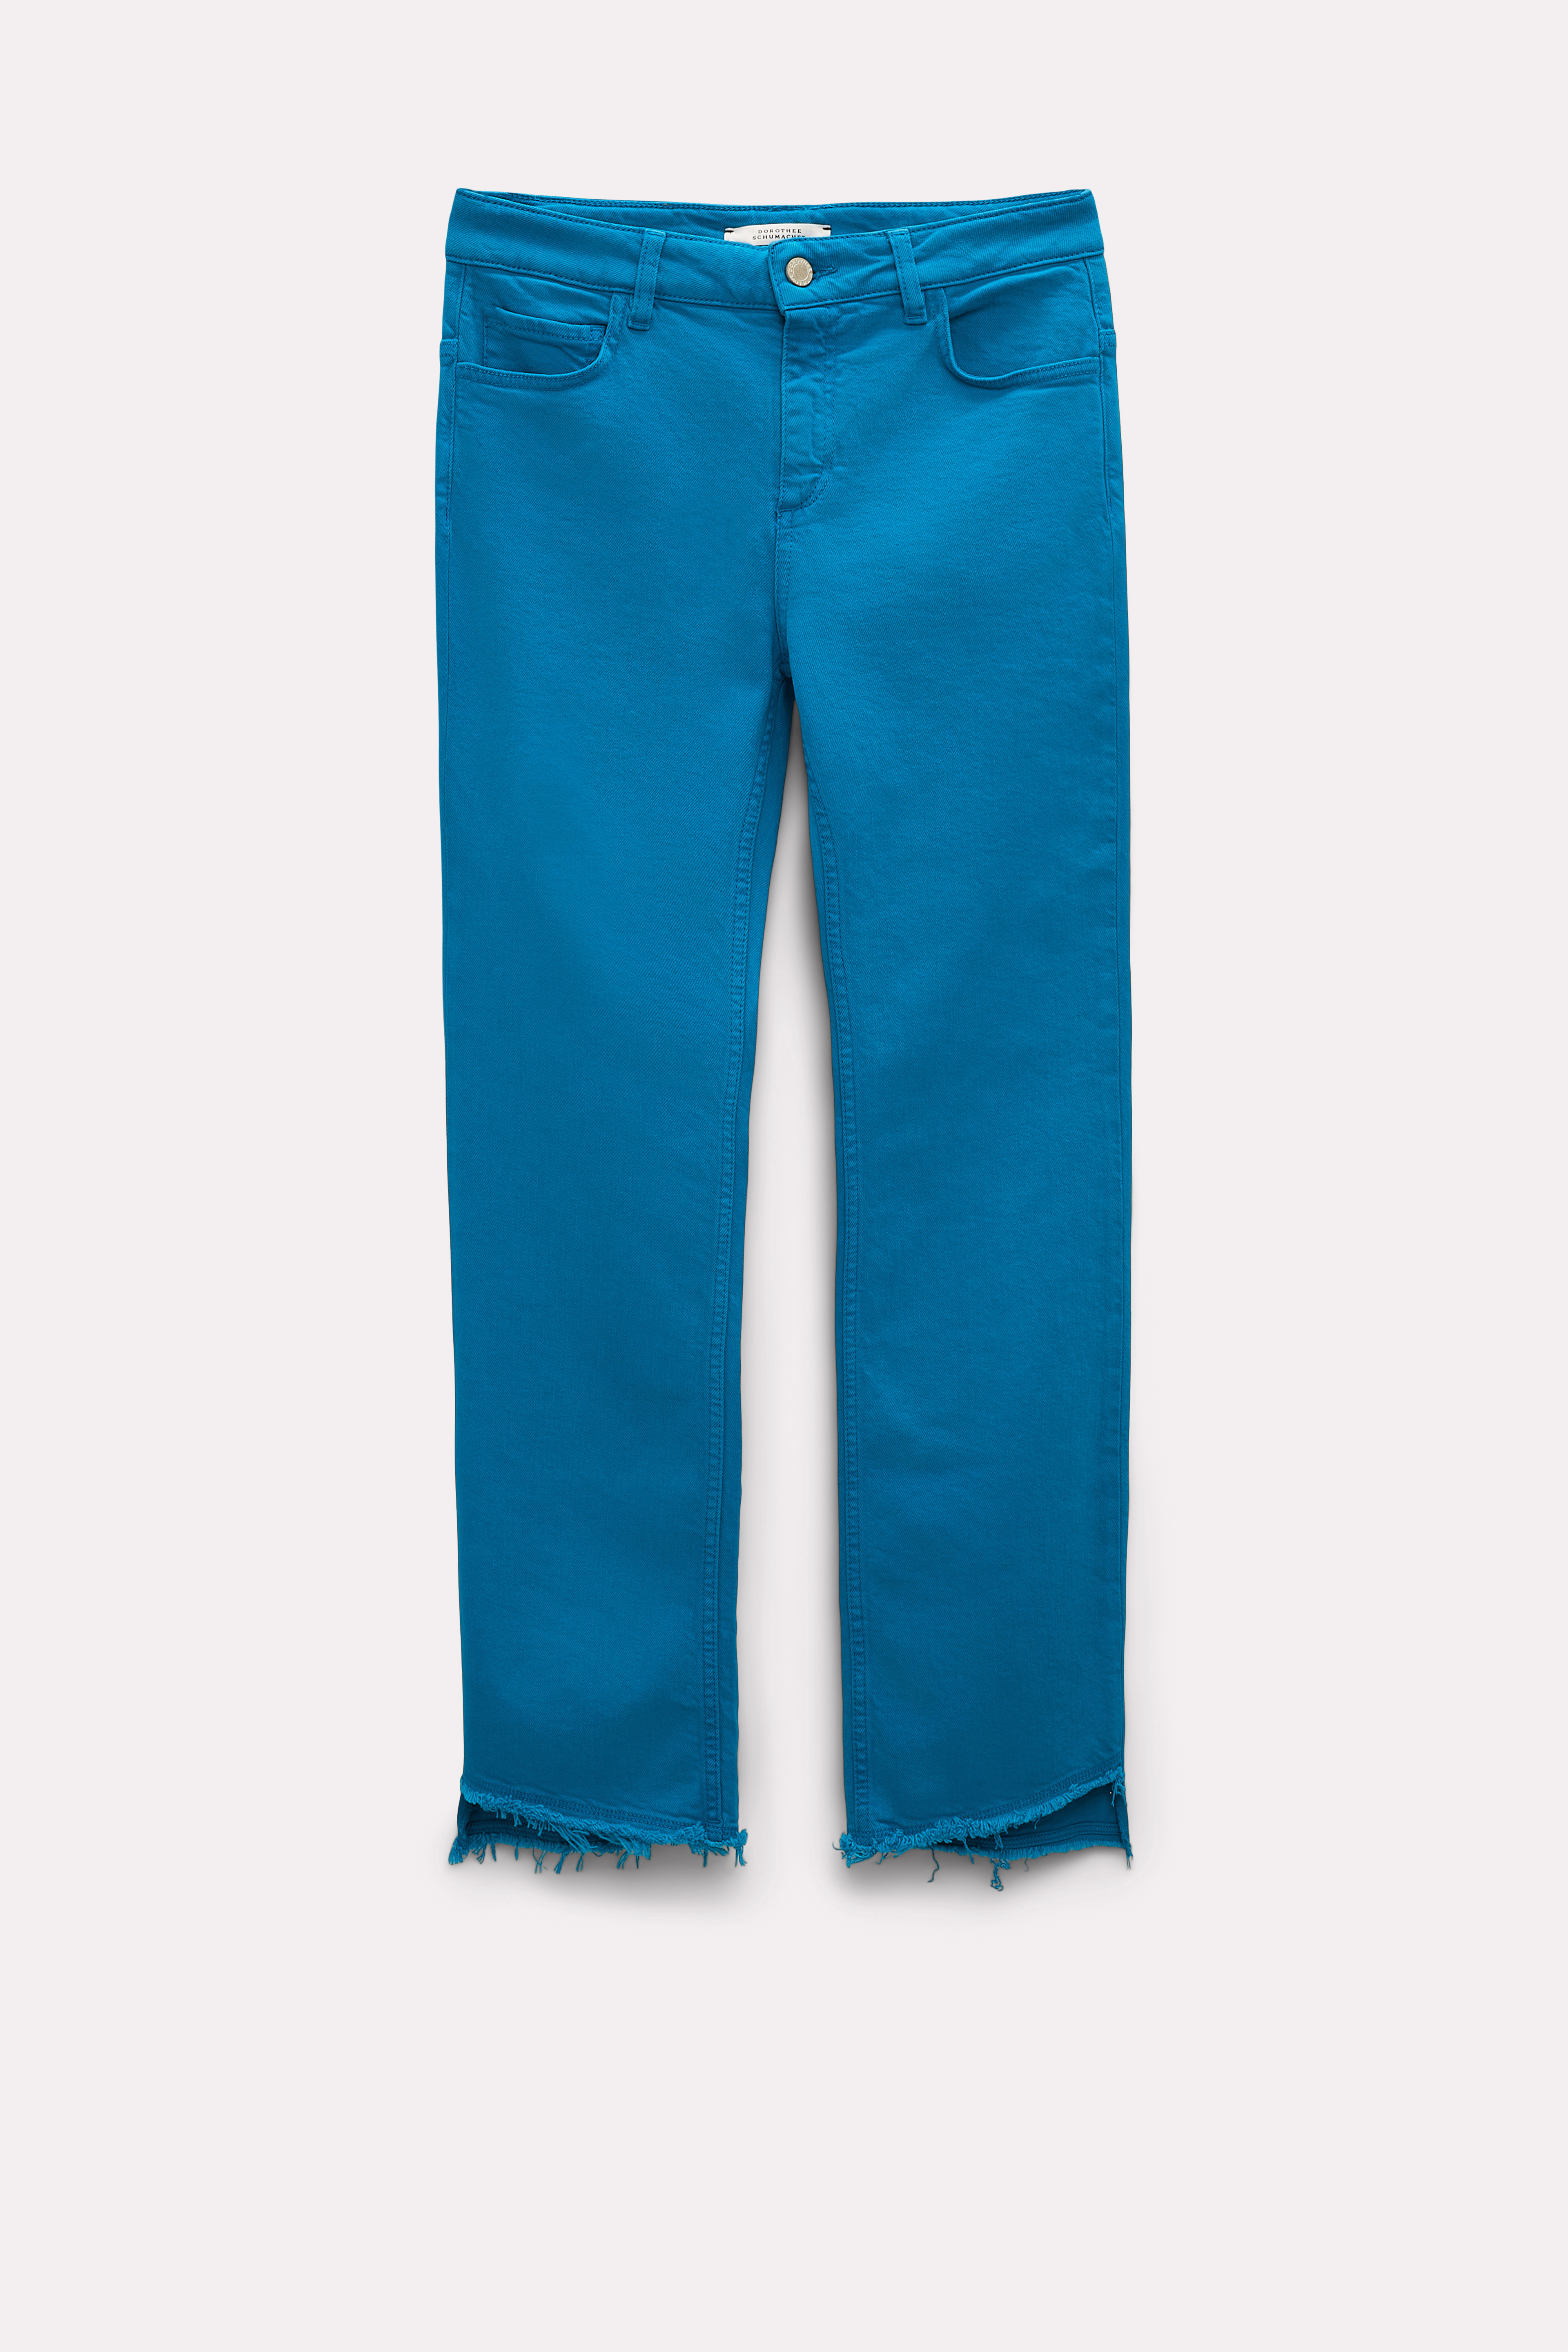 Dorothee Schumacher Flared Ankle Jeans With Cutoff Hem In Blue